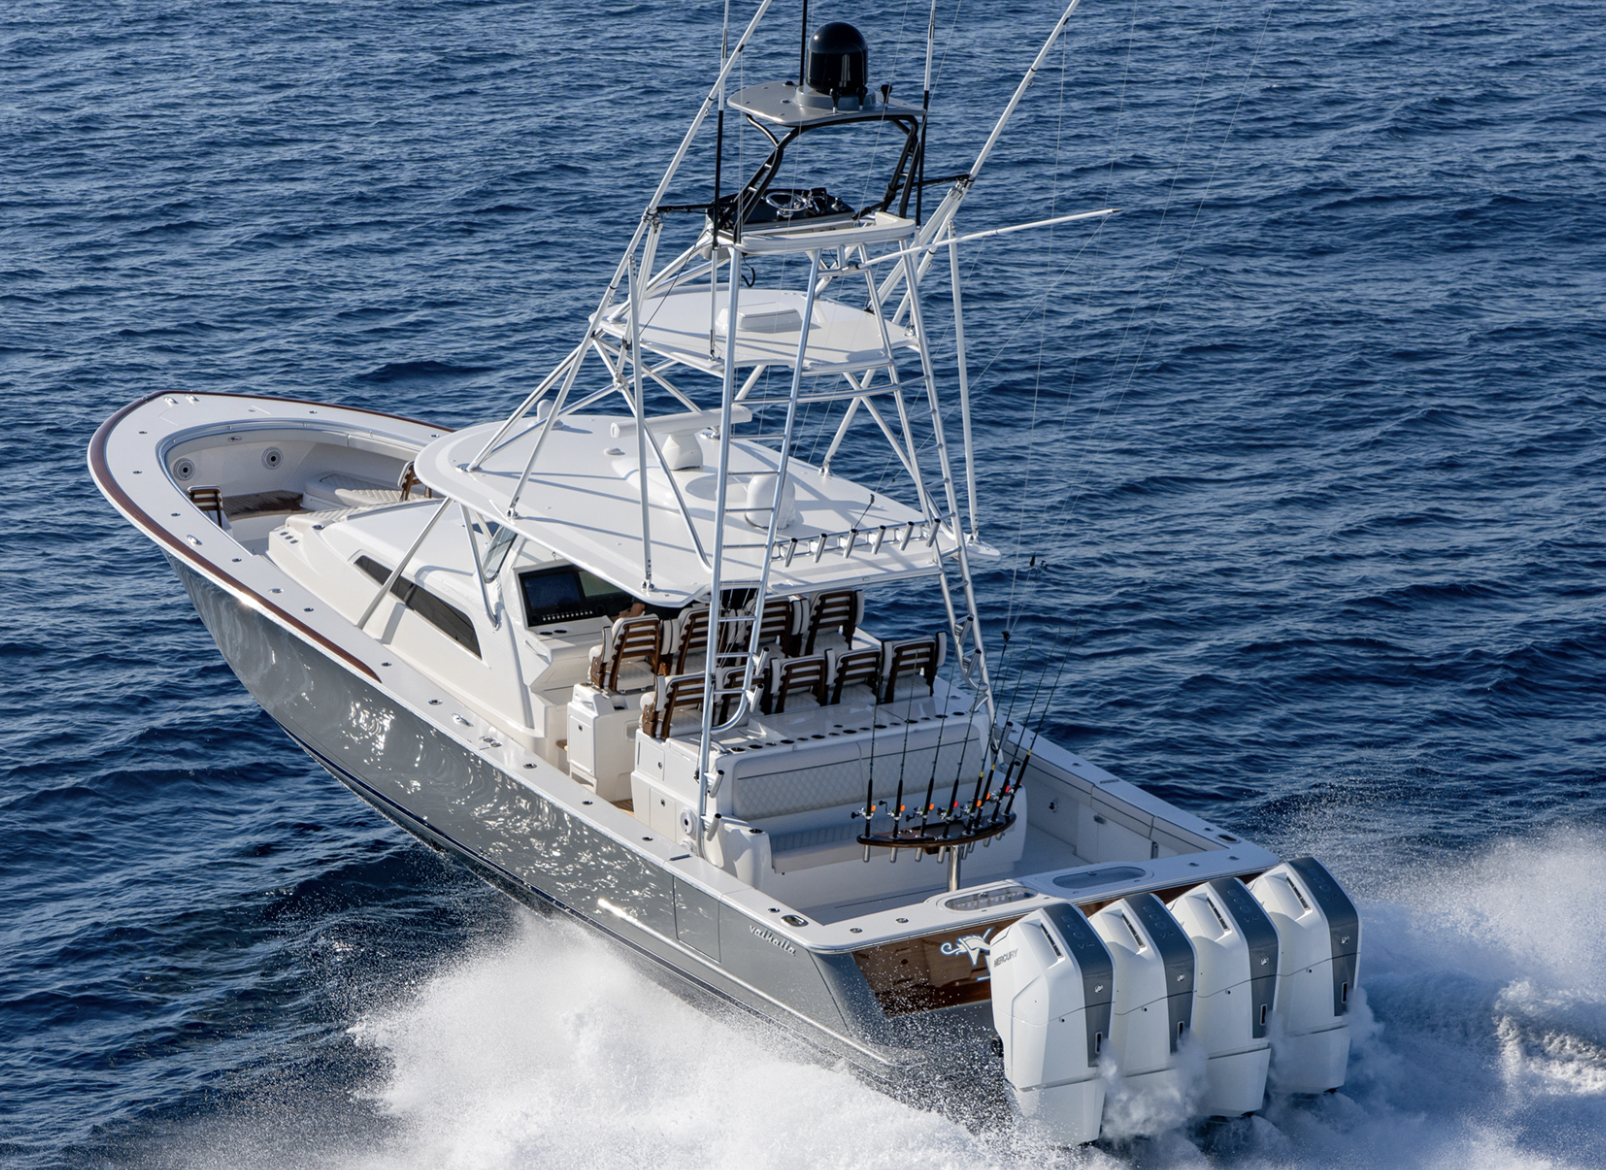 7 Reasons to Purchase a Center Console Boat